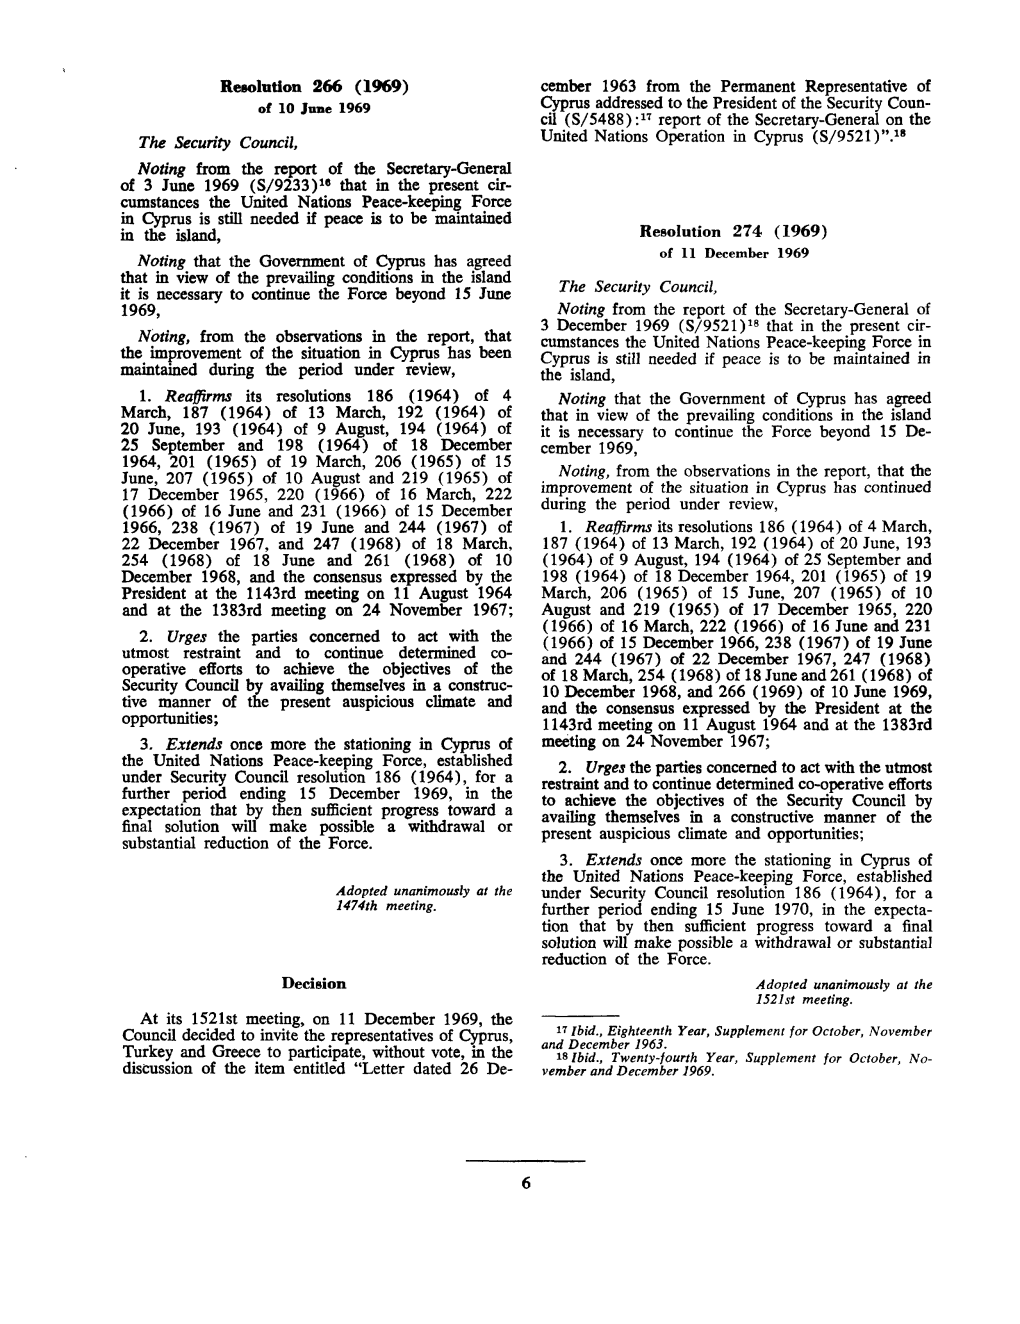 (1969) the Security Council, Noting from the Report of the Secretary